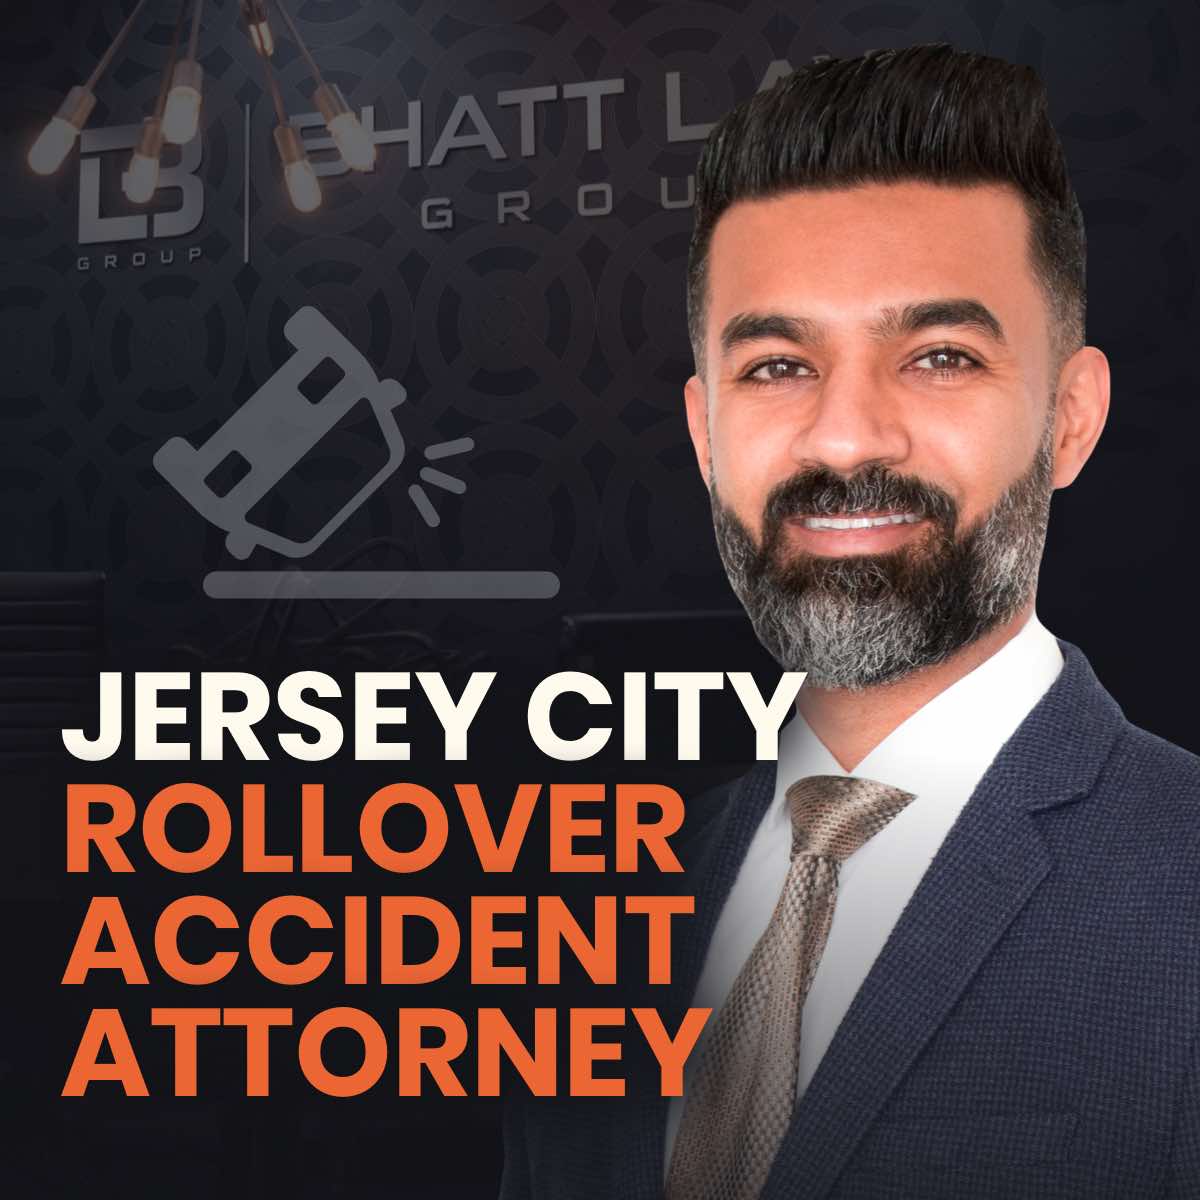 Jersey City Rollover Accident Attorney